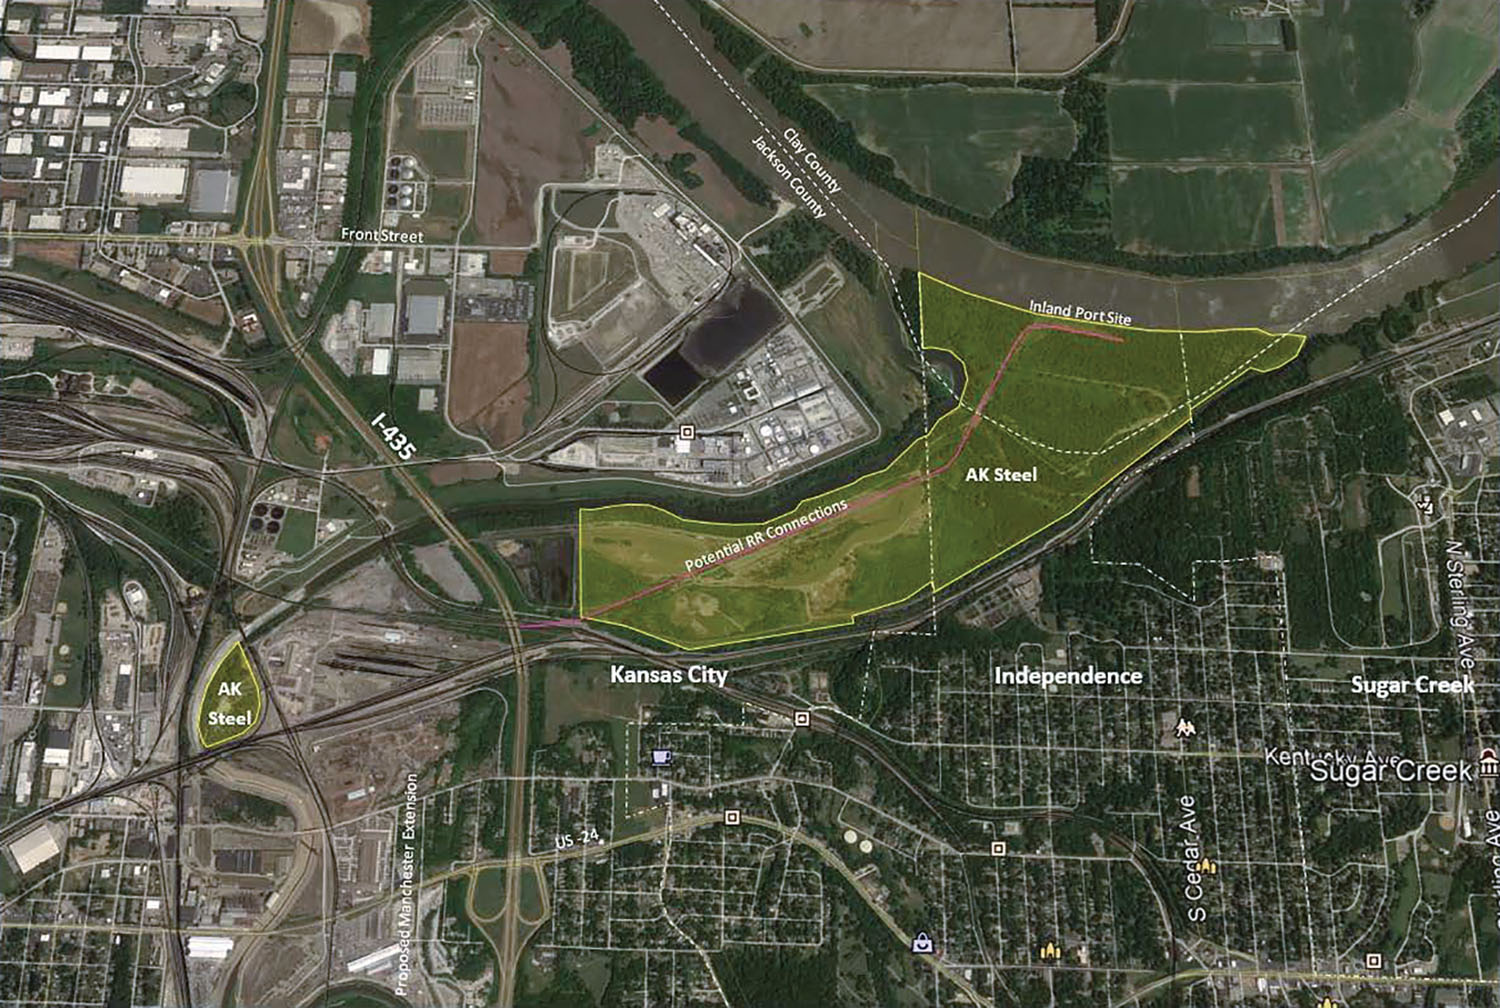 Missouri River Terminal will be developed on a former steel mill site at PortKC in Kansas City, Mo. The 415-acre property will eventually include barge and rail access for cargoes.